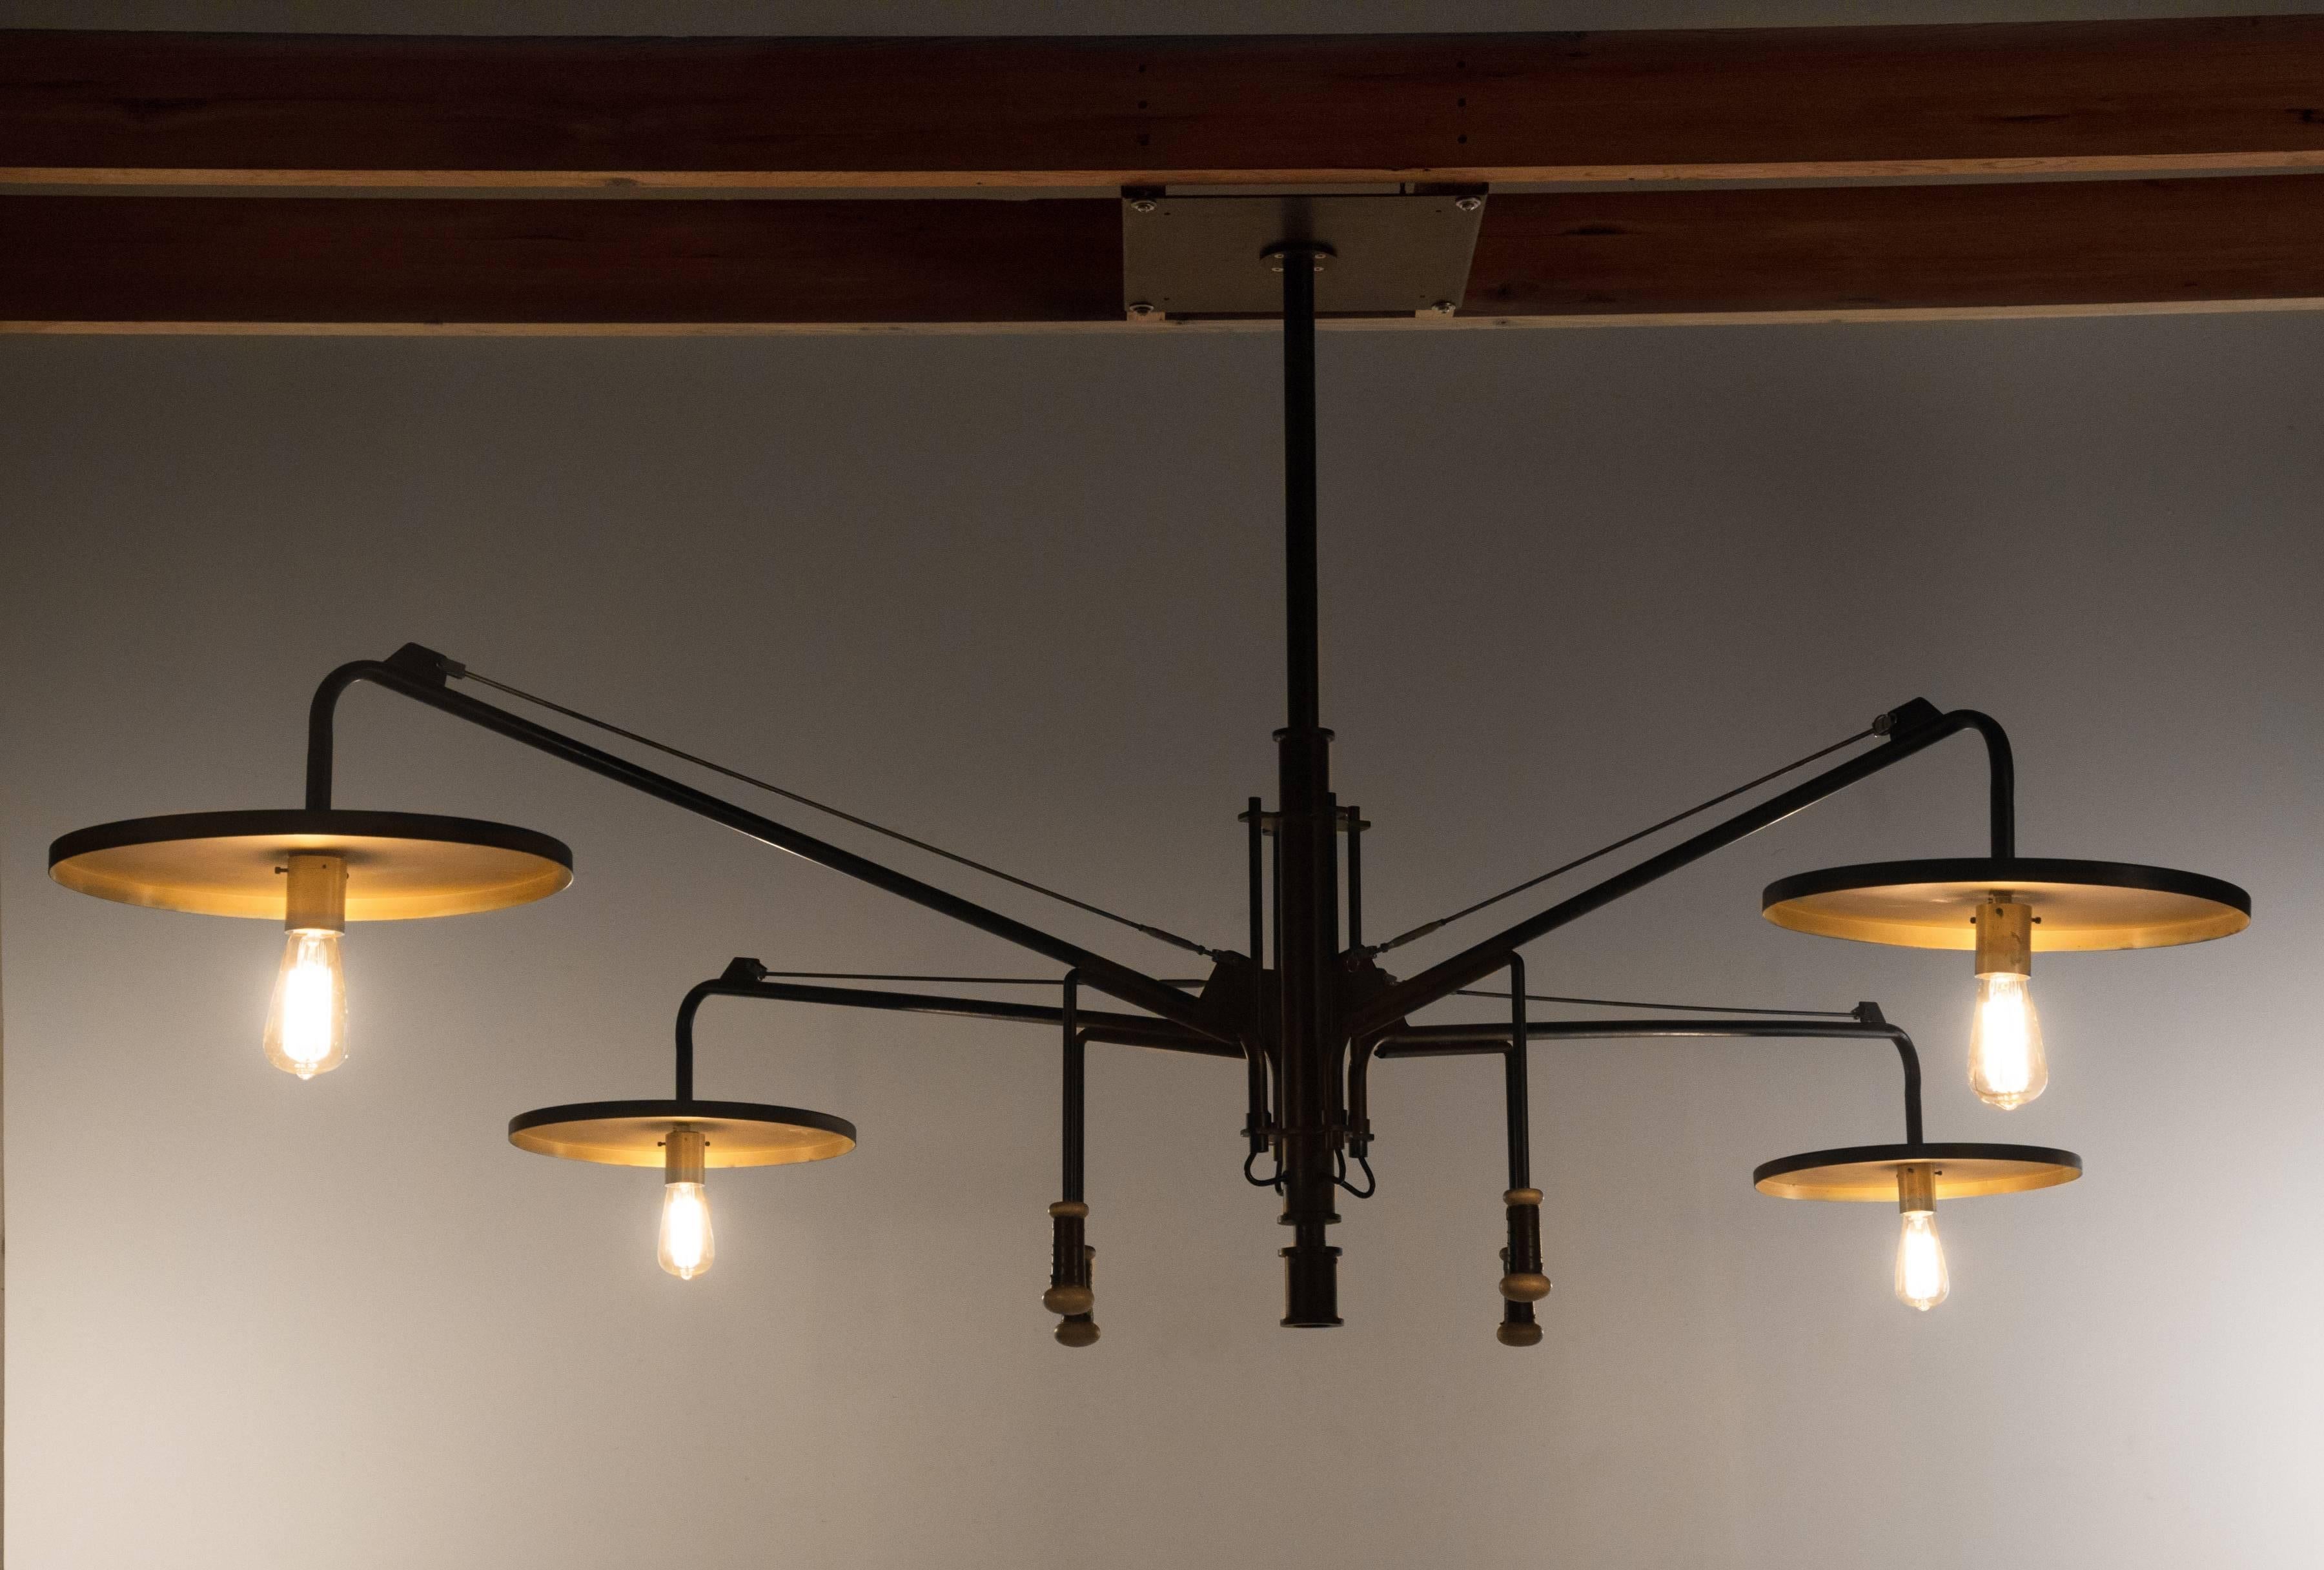 A monumental patinated steel, brass, maple and leather adjustable chandelier made by the lighting and design firm luminaire. As shown in images it is 6 feet 9 inches x 7 feet 4 inches, with a 3 feet 7 inch drop from the ceiling. The maple and